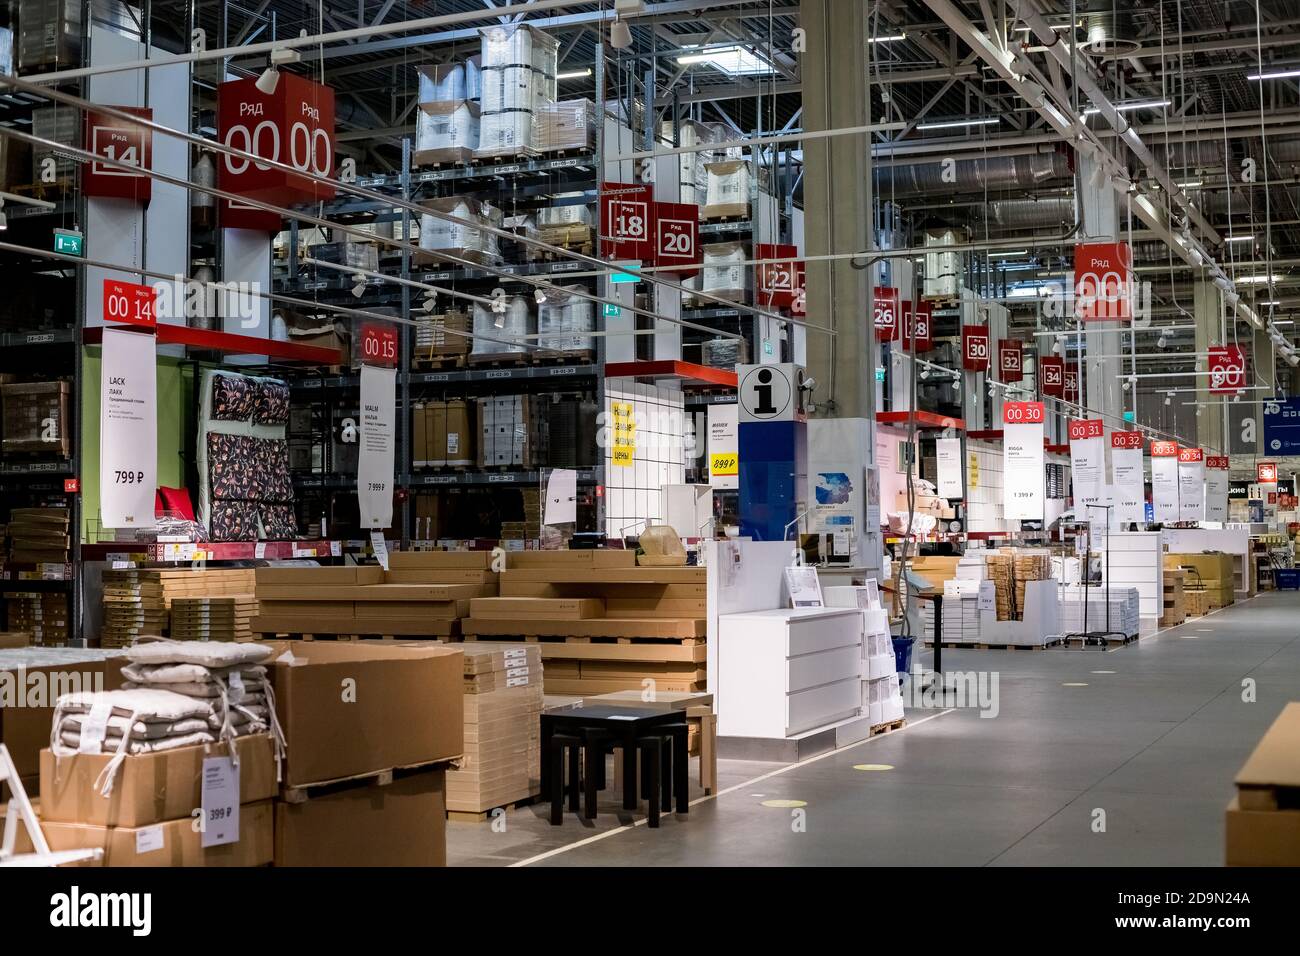 Moscow,Russia, 5 october 2020: Warehouse storage in an IKEA store.  Warehouse of the IKEA in Russia. IKEA is a retail furniture and home  accessories Stock Photo - Alamy